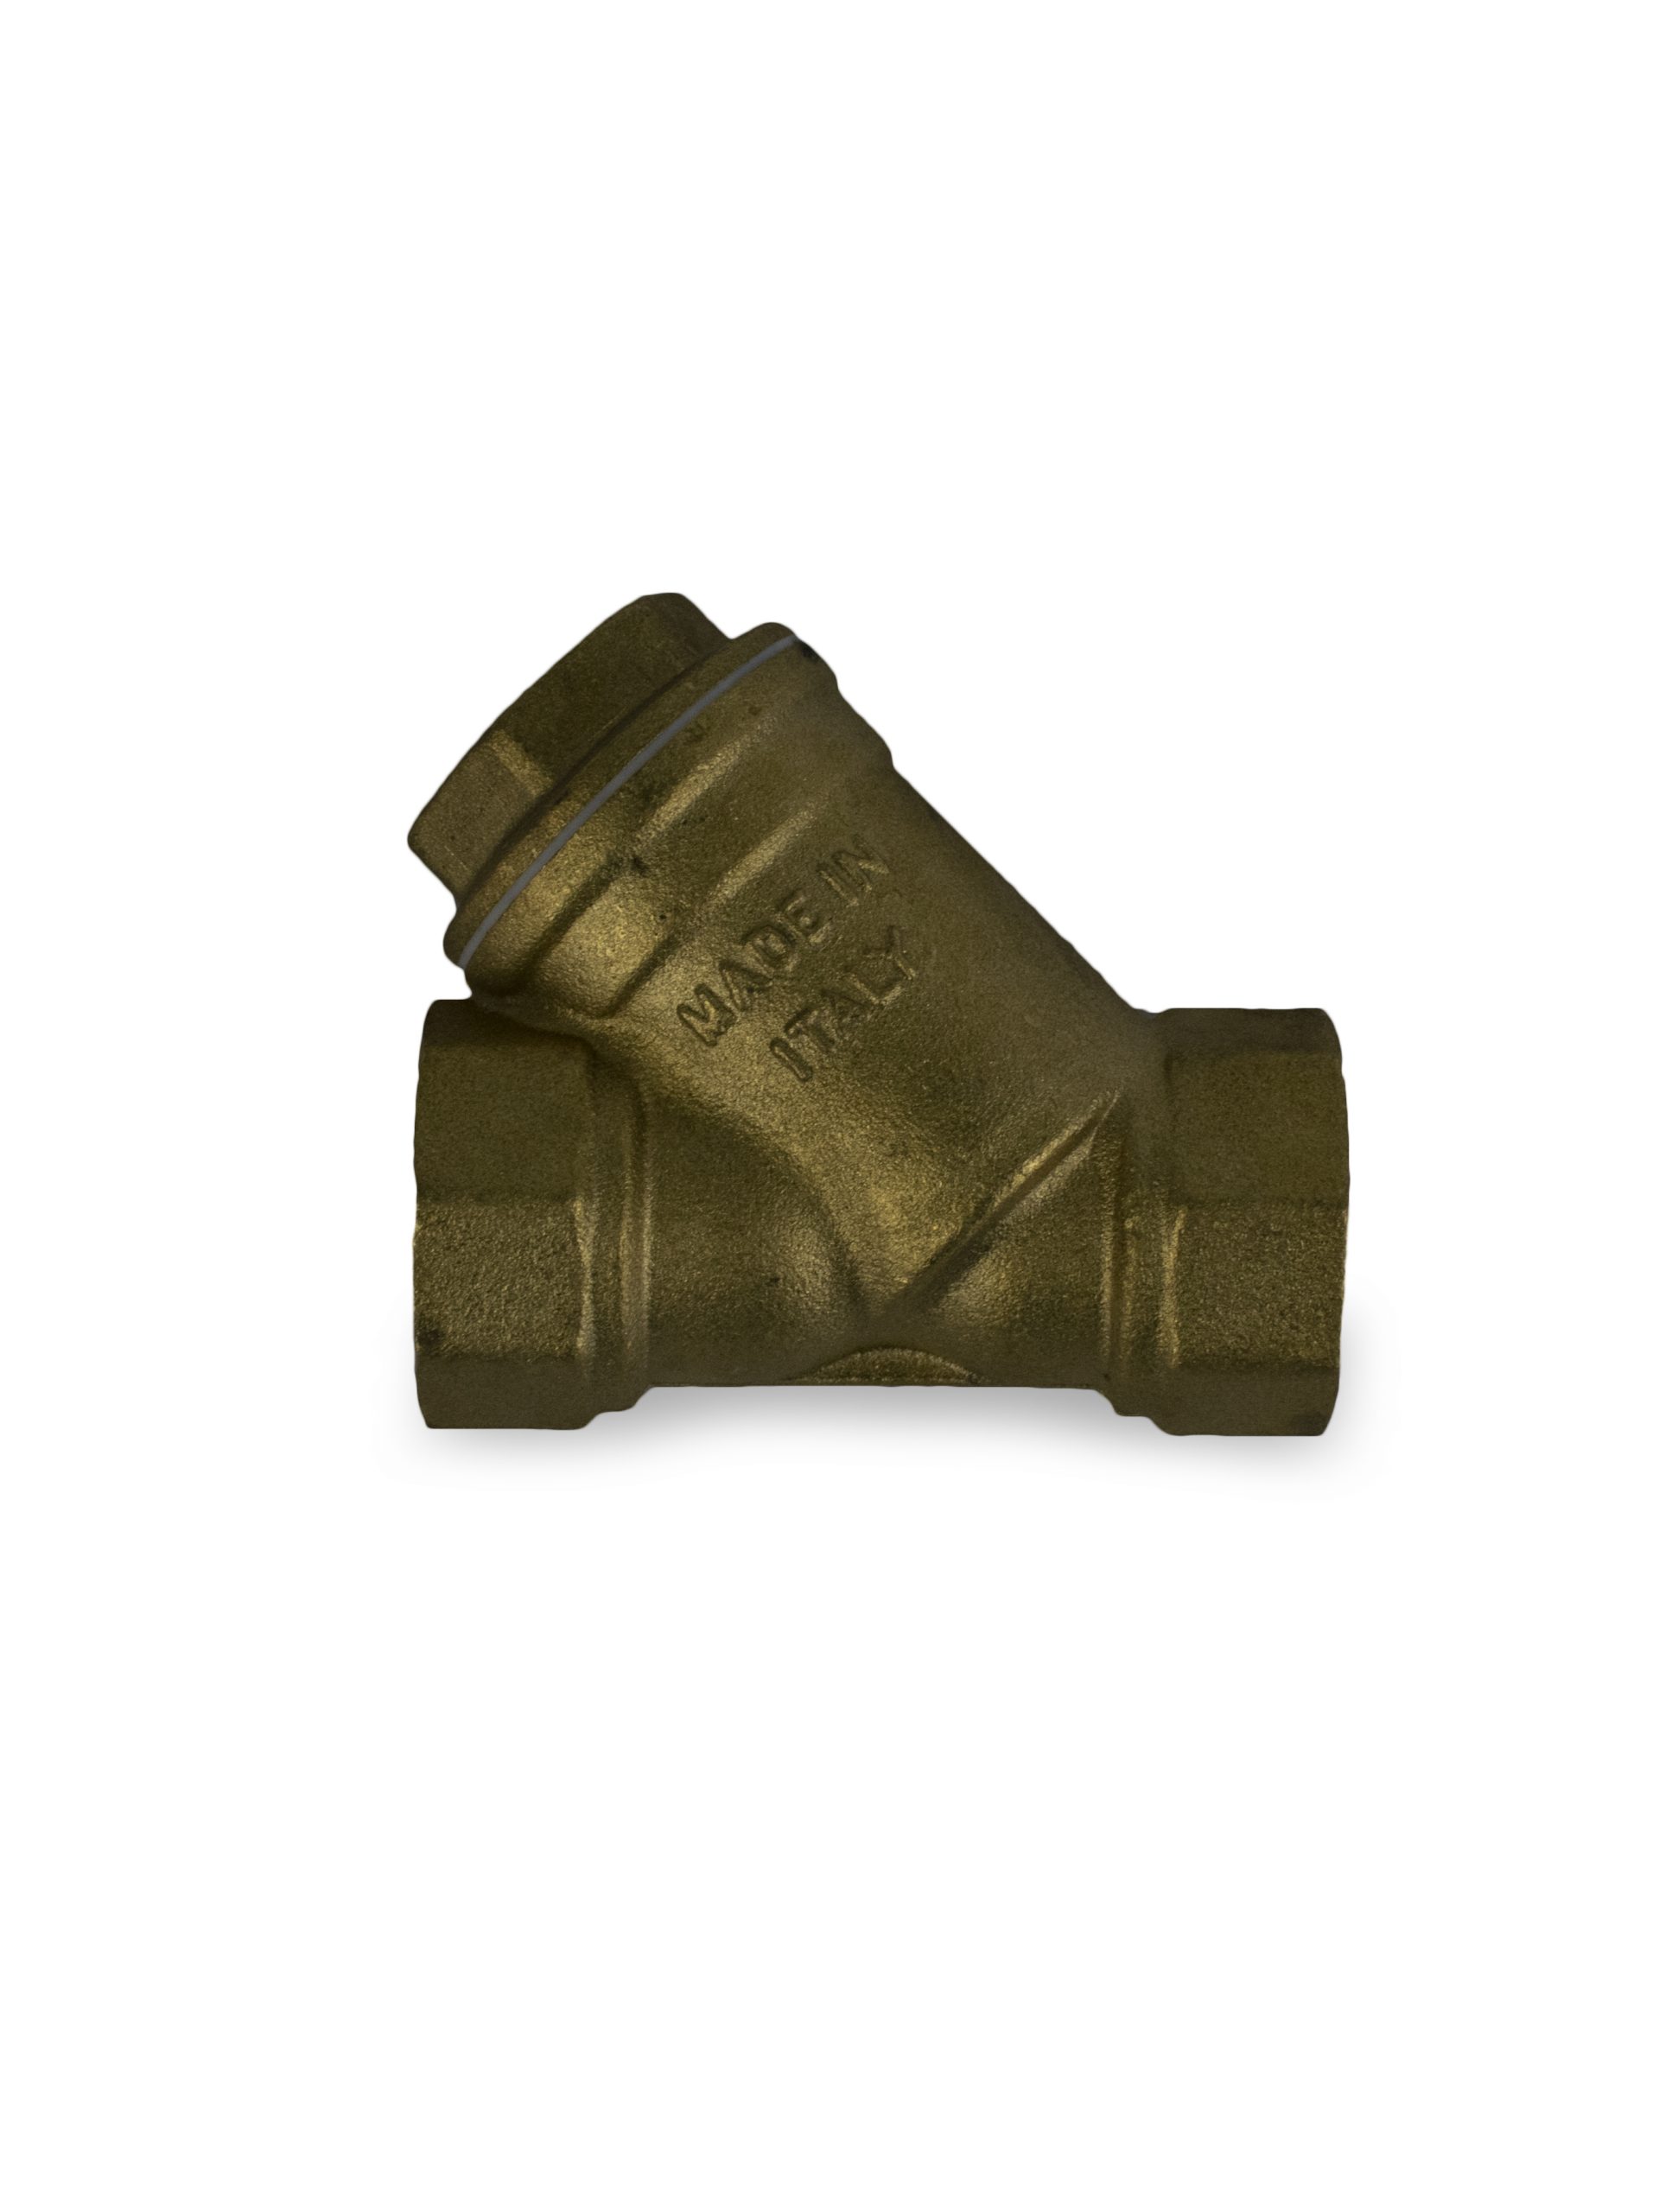 BRASS FILTER (STRAINER) SIZE 1 1/4 Inches from Gas Equipment Company Llc Abu Dhabi, UNITED ARAB EMIRATES